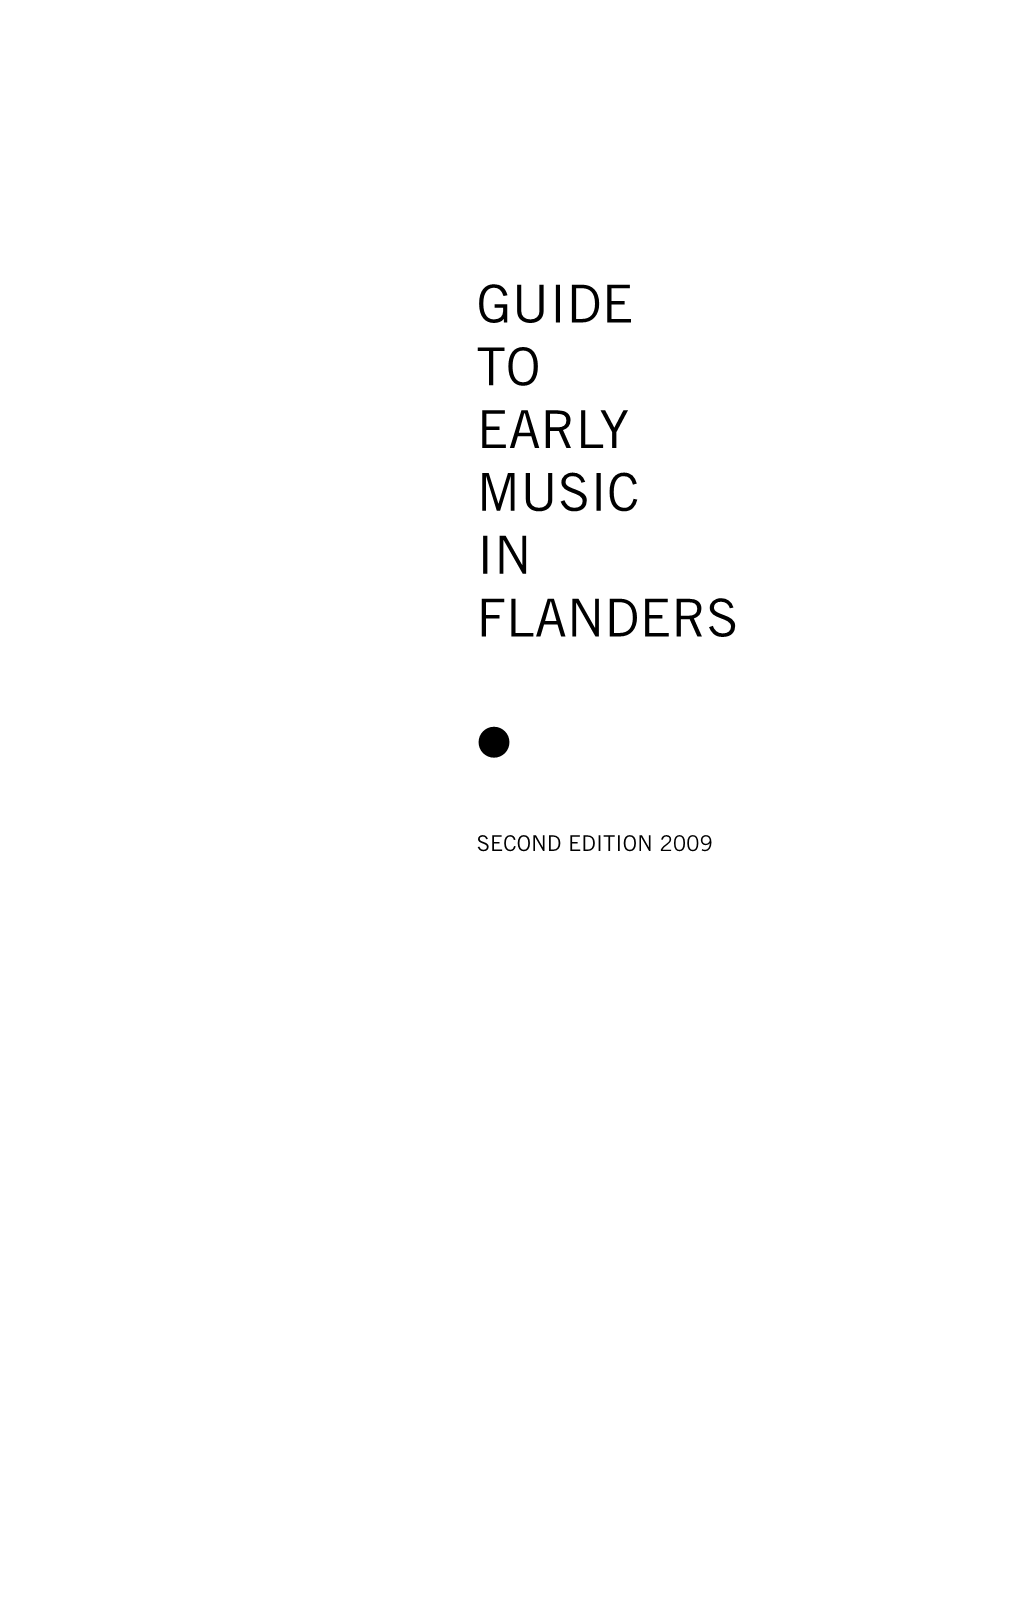 Guide to Early Music in Flanders